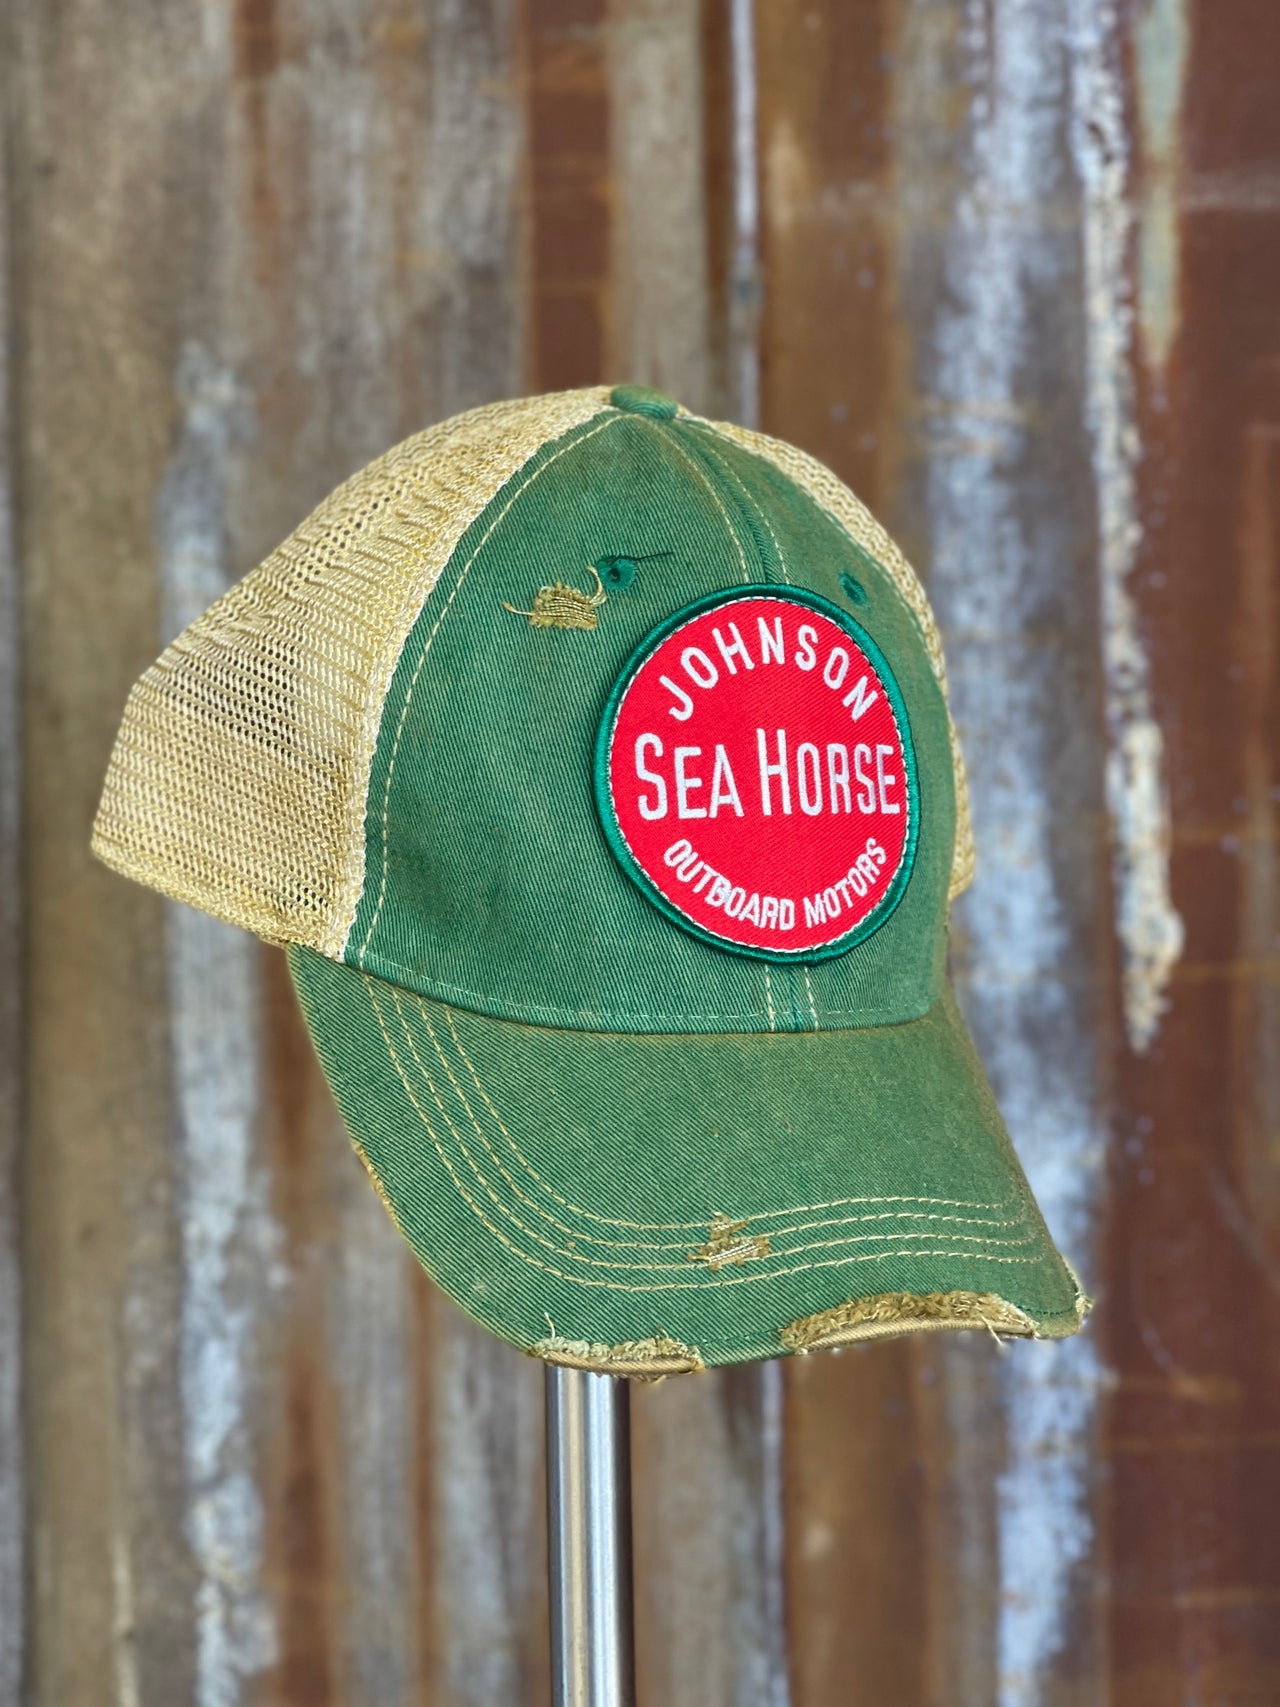 Johnson Outboard Round Patch Hat - Distressed Kelly Green Snapback